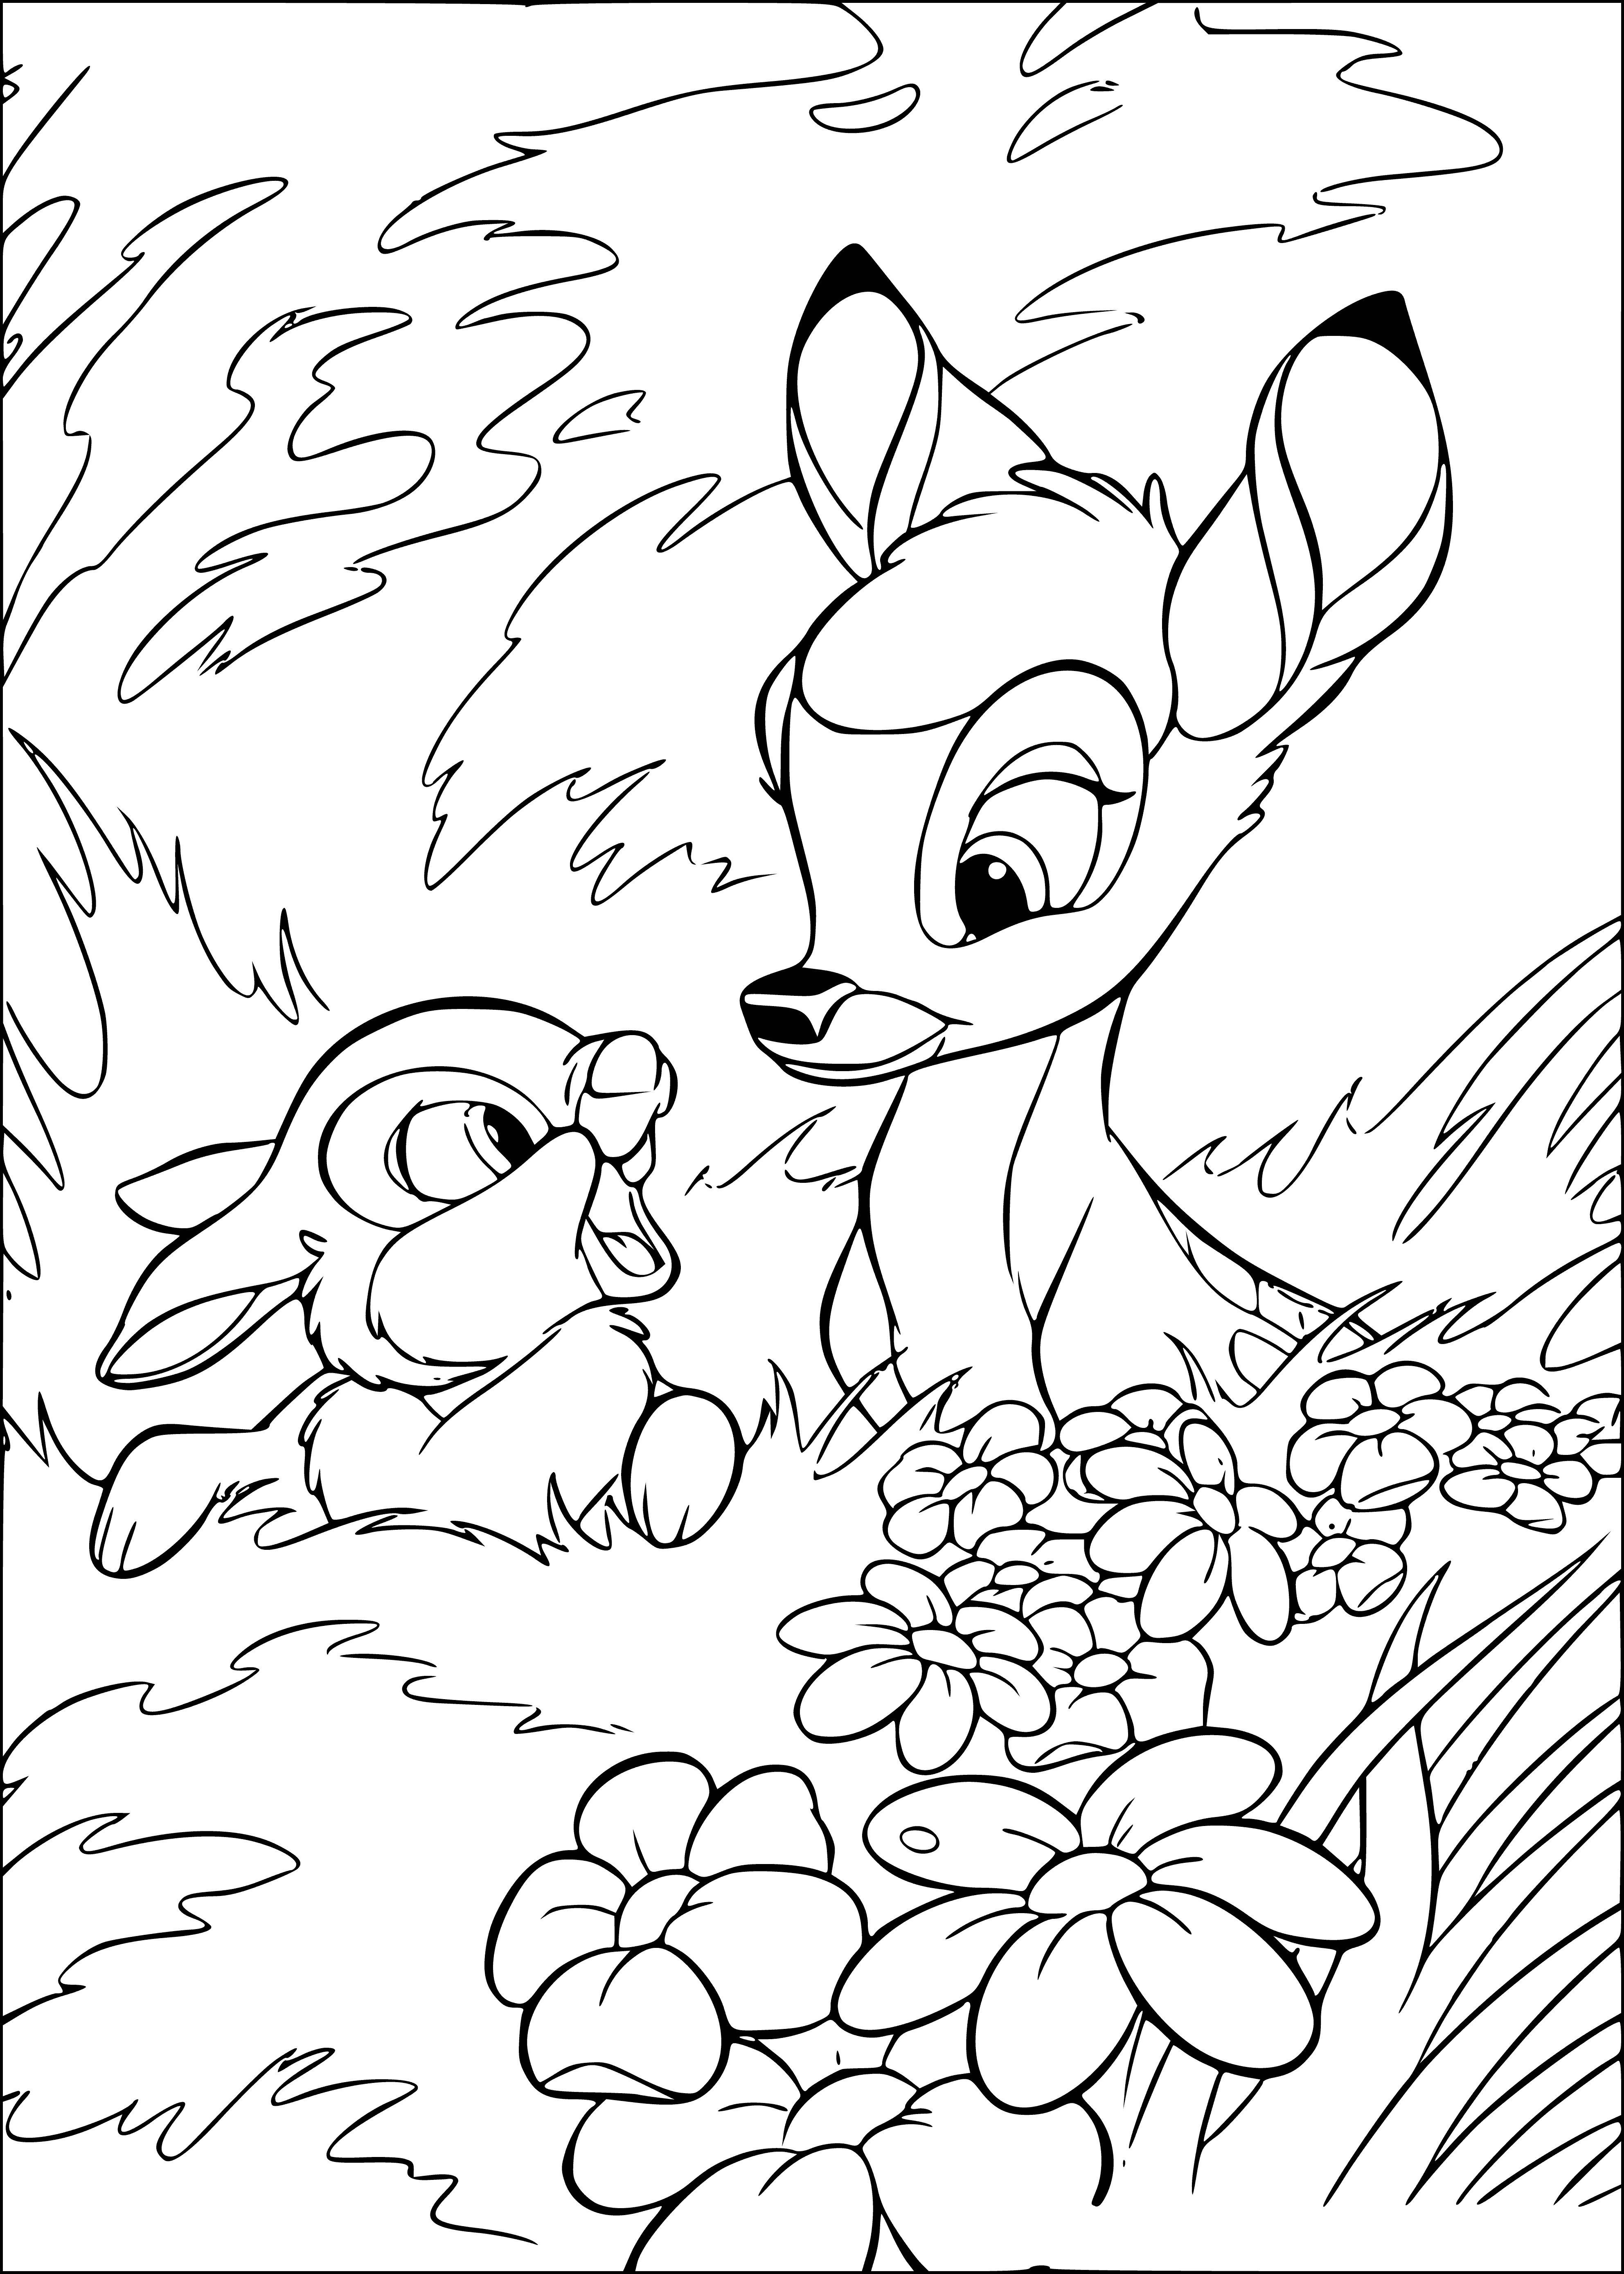 coloring page: Two adorable bunnies, one white and one brown & white, looking into the distance with their ears perked up. #cutenessoverload